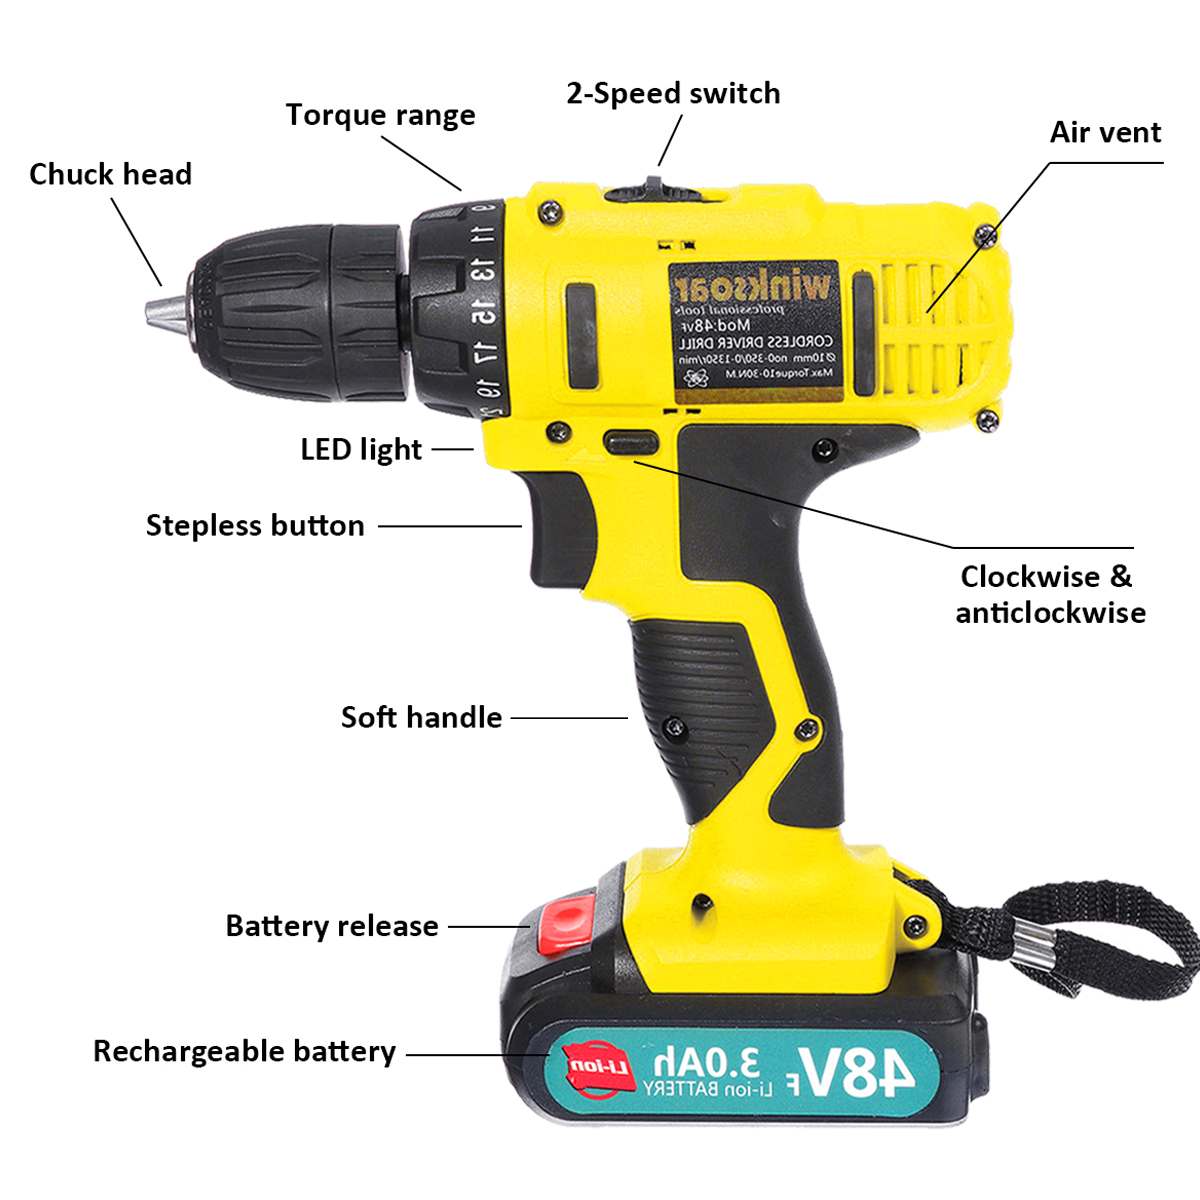 48V Electric Screwdriver Cordless Drill Rechargeable Li-Ion Battery Operated Handheld Drill Battery Charging 2 Speed Power Tools